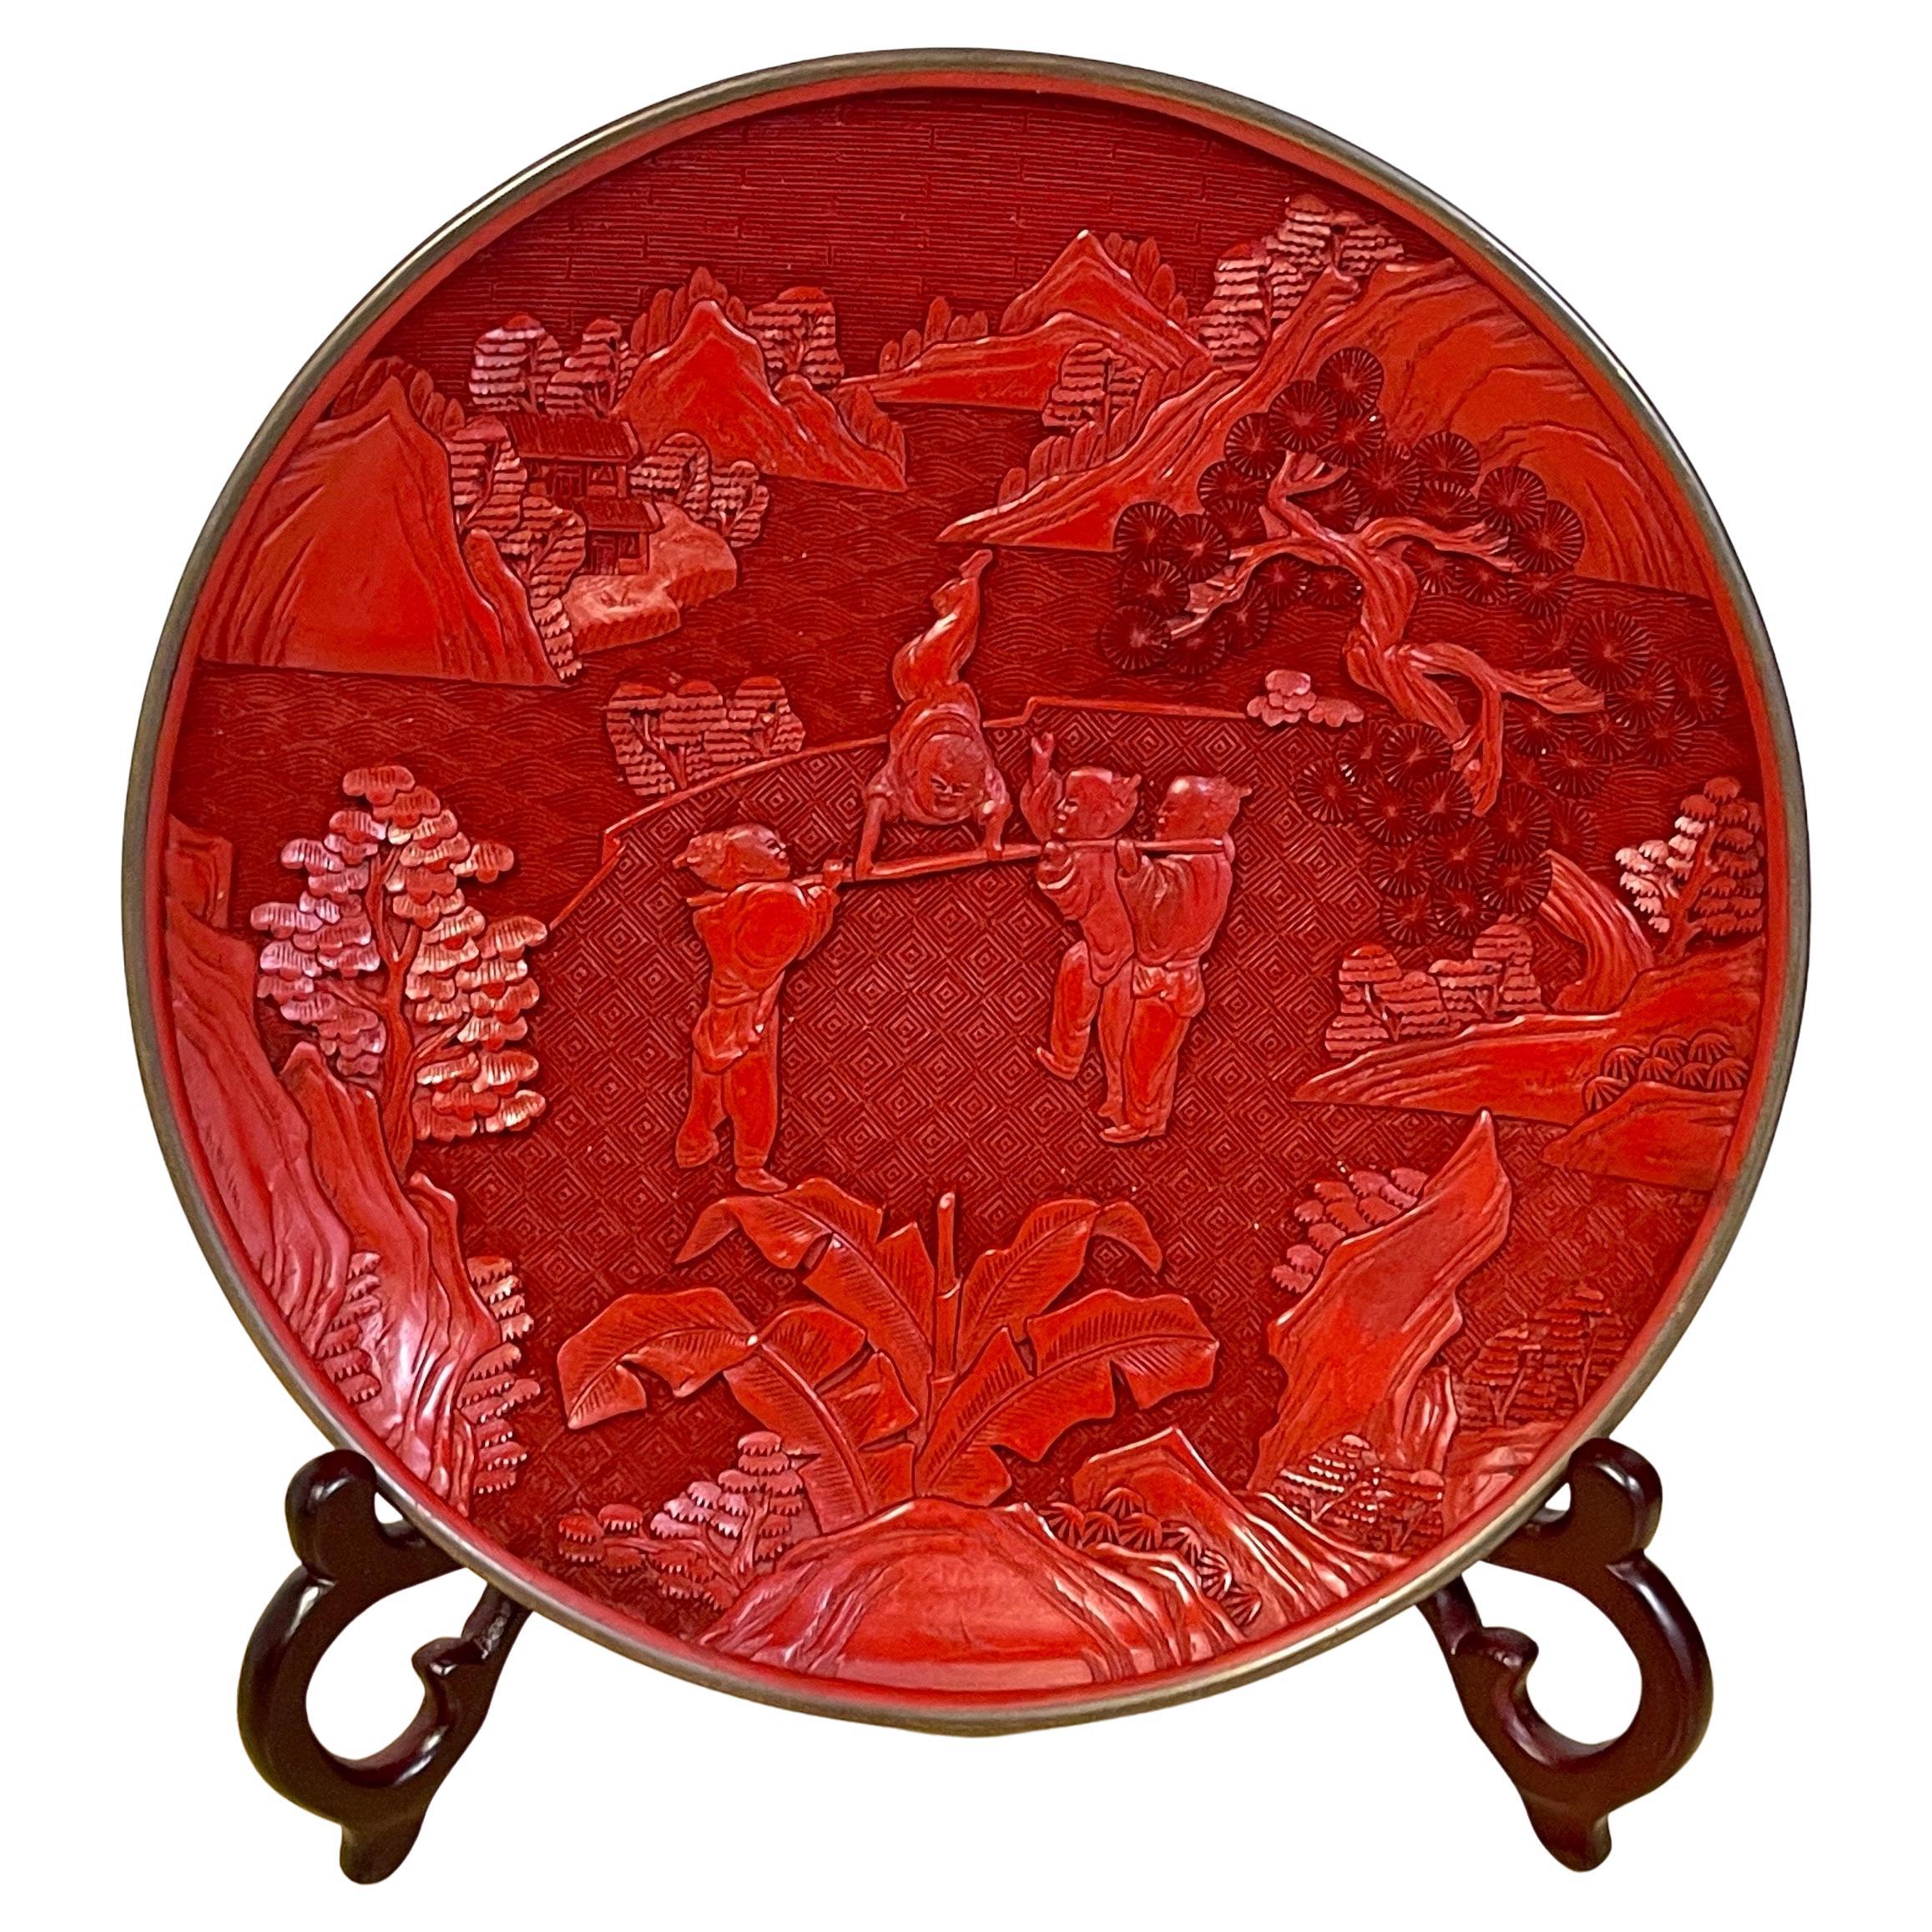 Chinese Export Carved Cinnabar 'Acrobats' Display Plate, & Stand